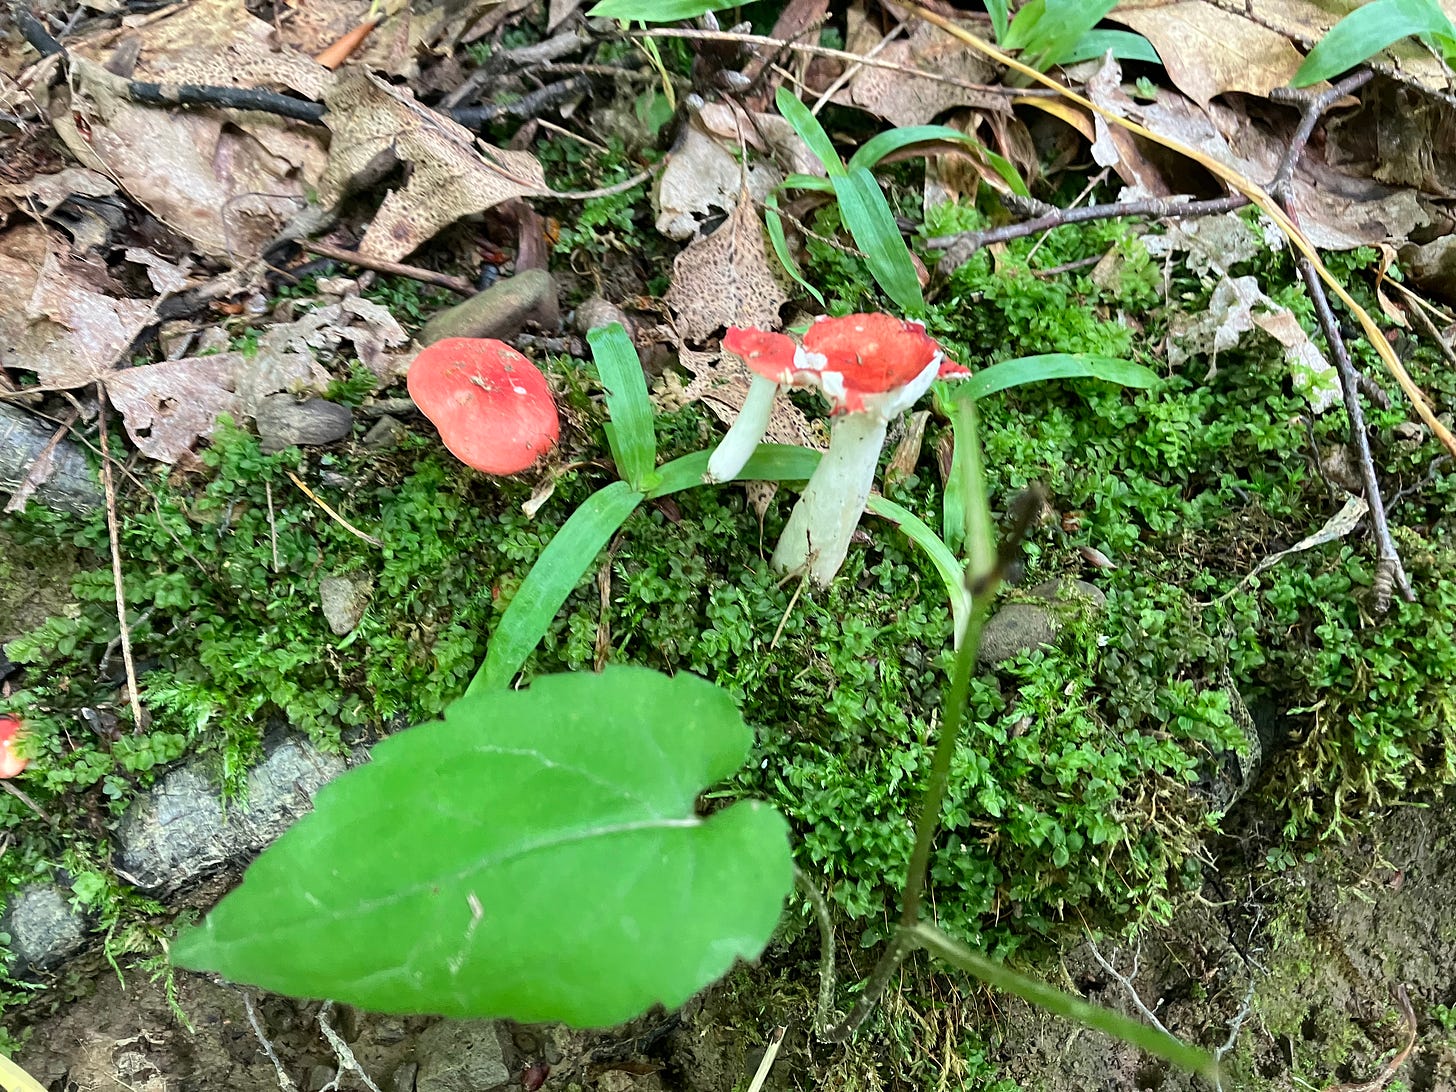 Red mushrooms, leaves and moss on a forest bed, along with dead leaves